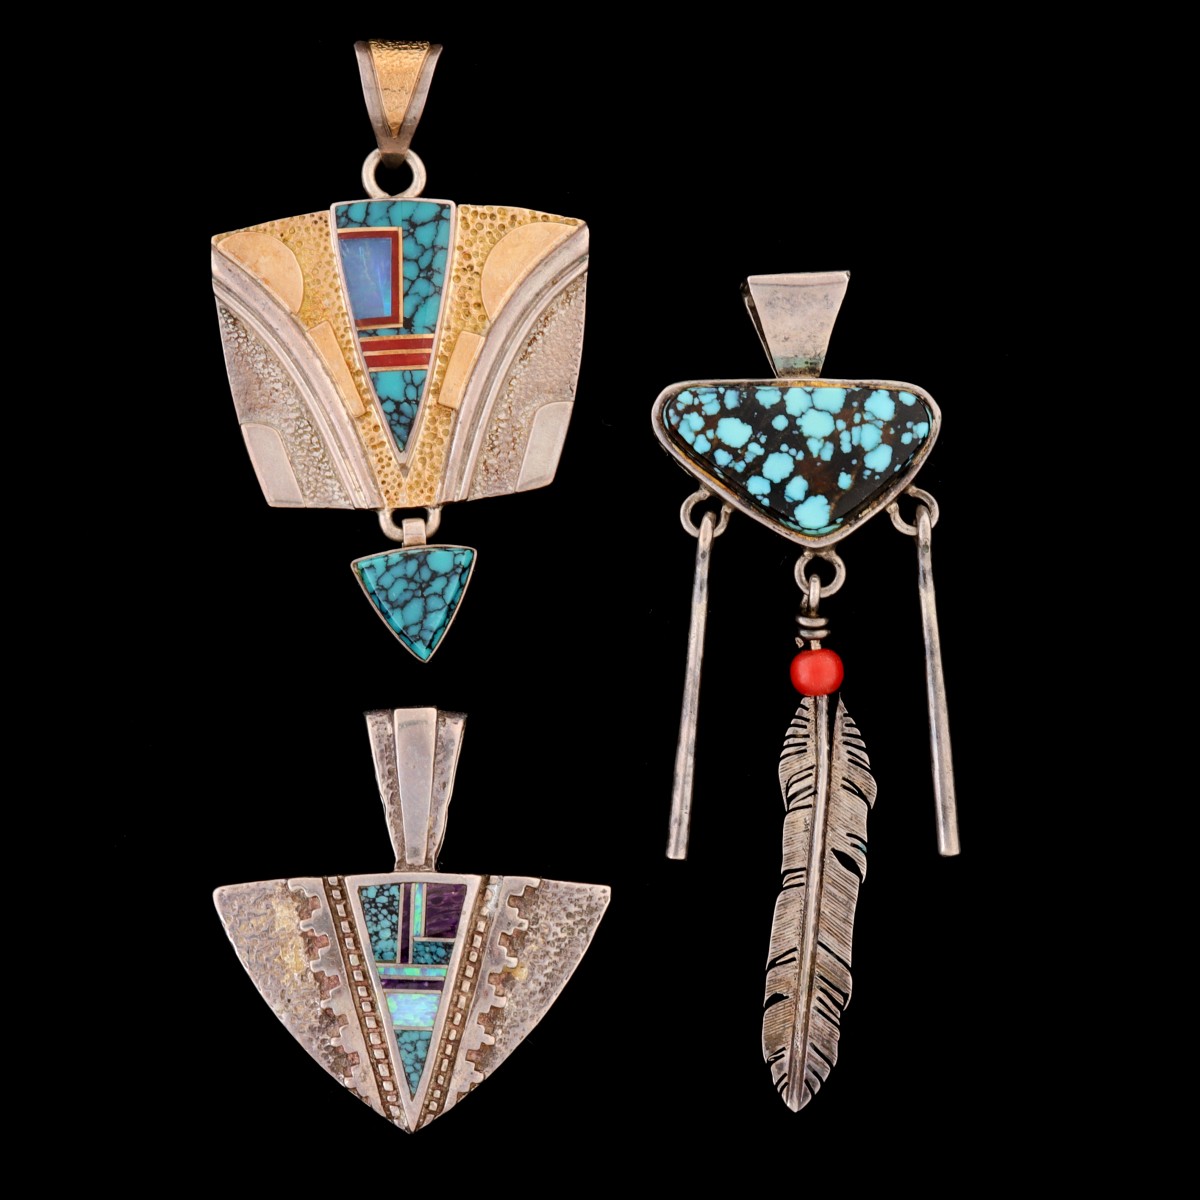 INLAID PENDANTS INCL. TRACEY/KNIFEWING WITH 14K